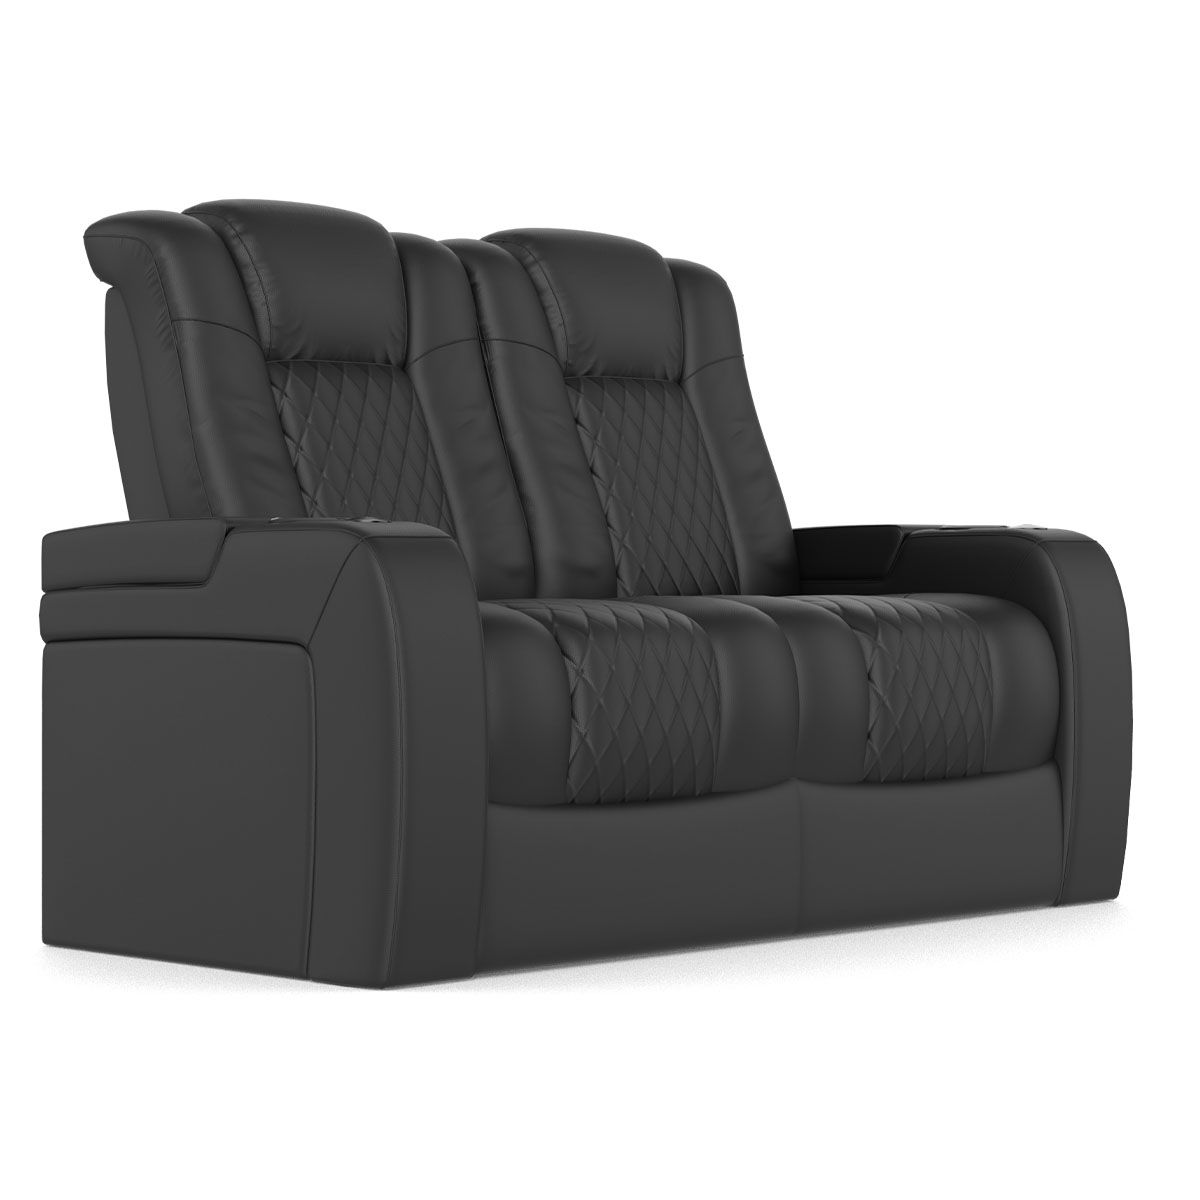 Audio Advice Revelation Home Theater Seating - angled front view of loveseat